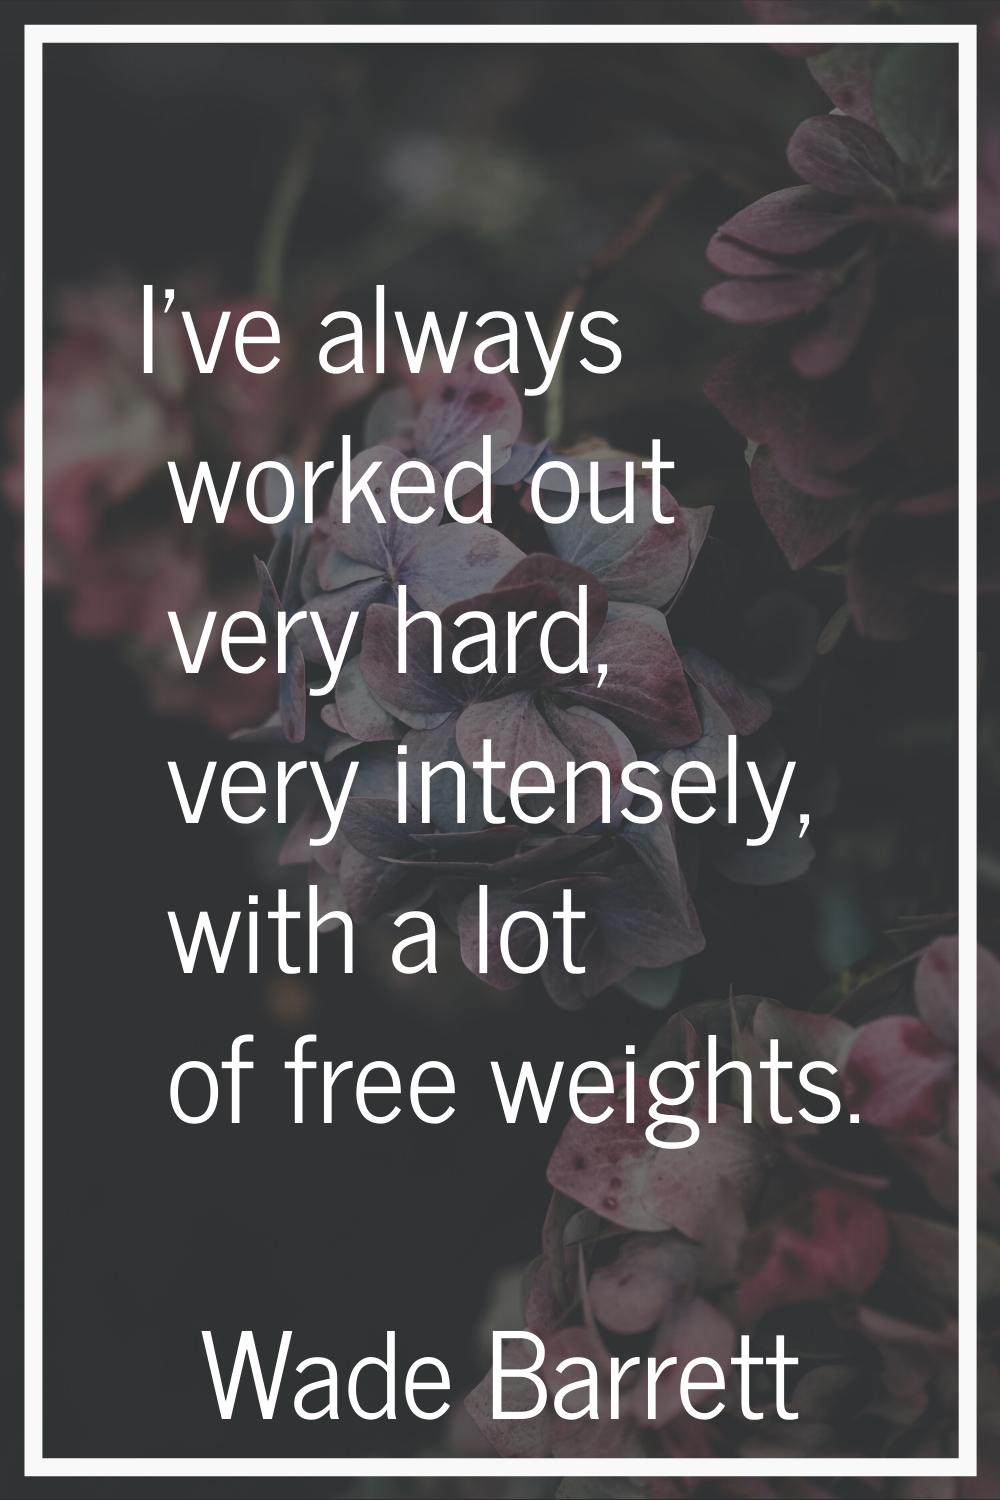 I've always worked out very hard, very intensely, with a lot of free weights.